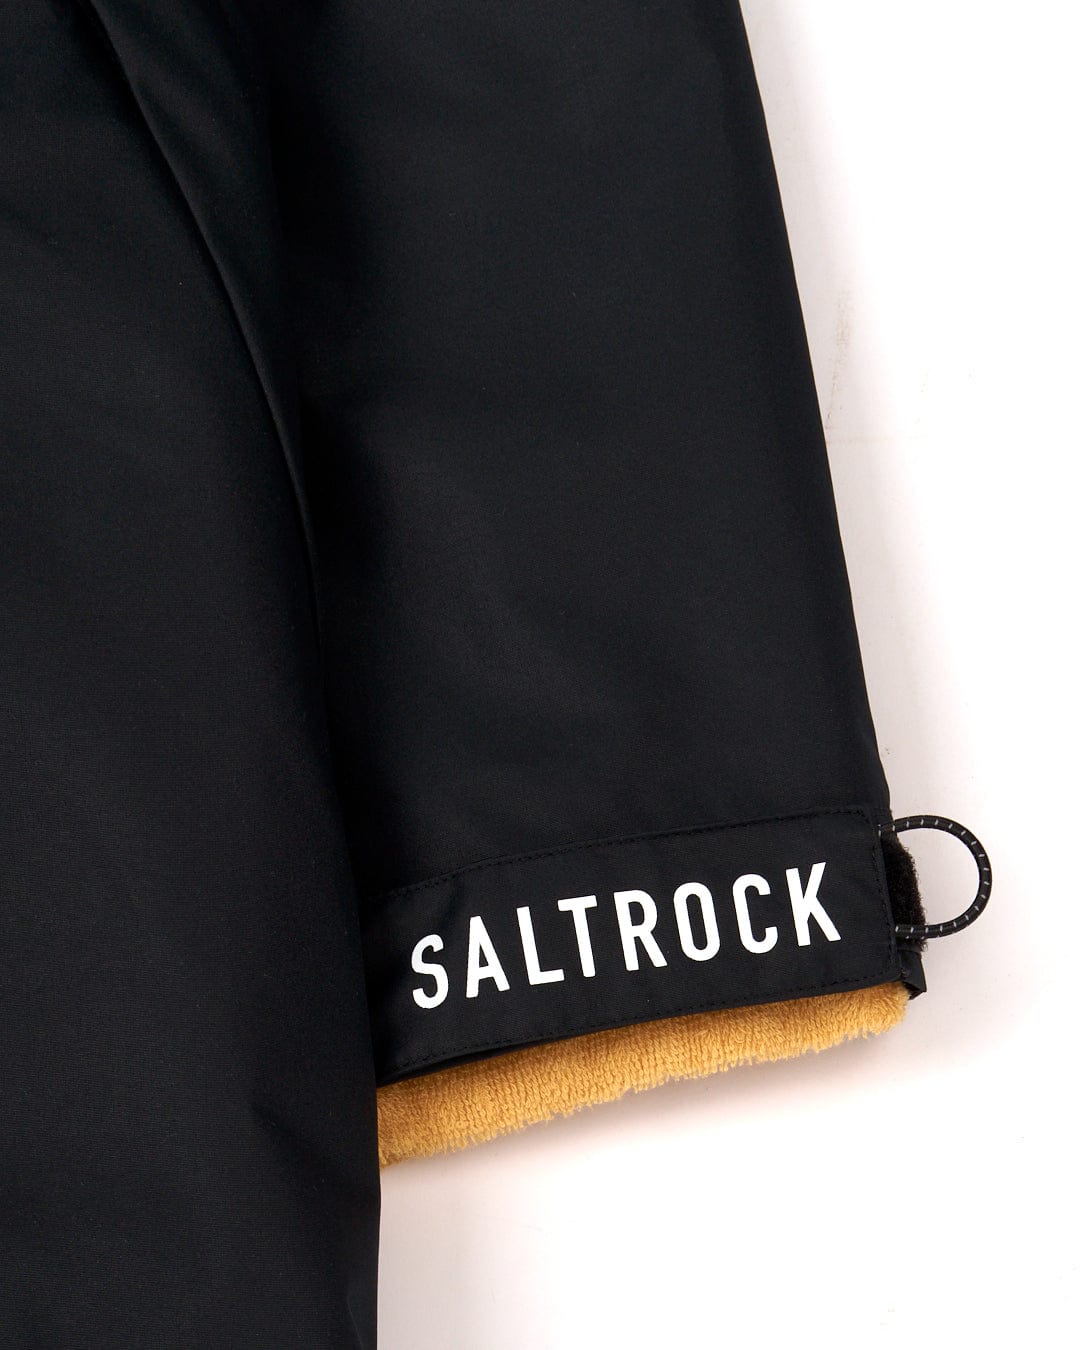 Close-up view of a Saltrock black jacket with a "3 in 1 Recycled Four Seasons Changing Robe - Black/Yellow" brand tag on the cuff over a tan towelling lining.